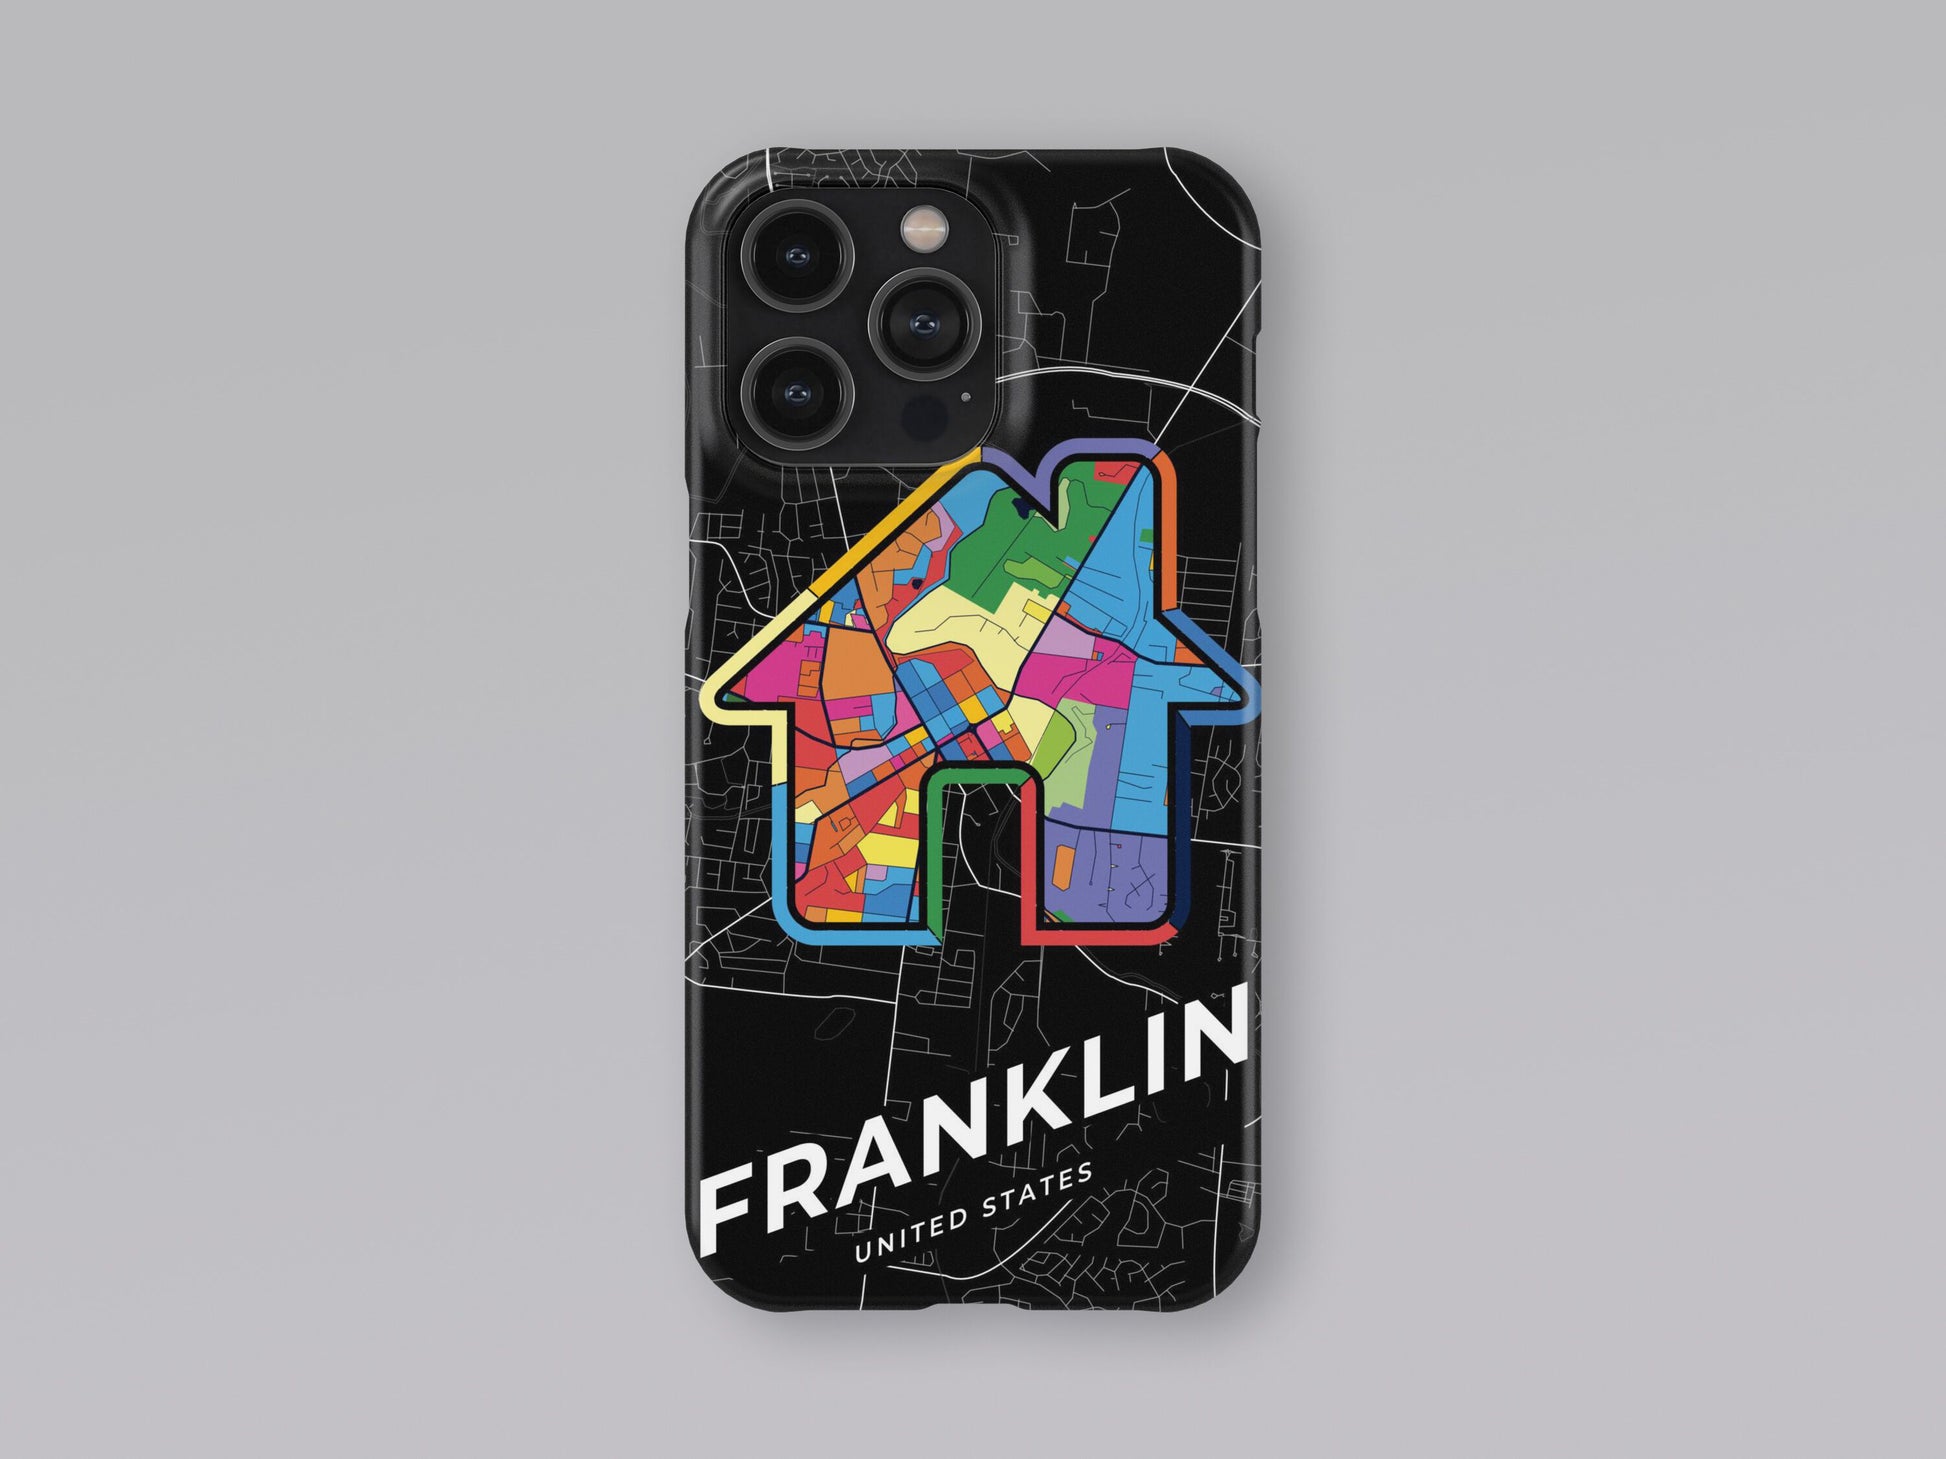 Franklin Tennessee slim phone case with colorful icon. Birthday, wedding or housewarming gift. Couple match cases. 3